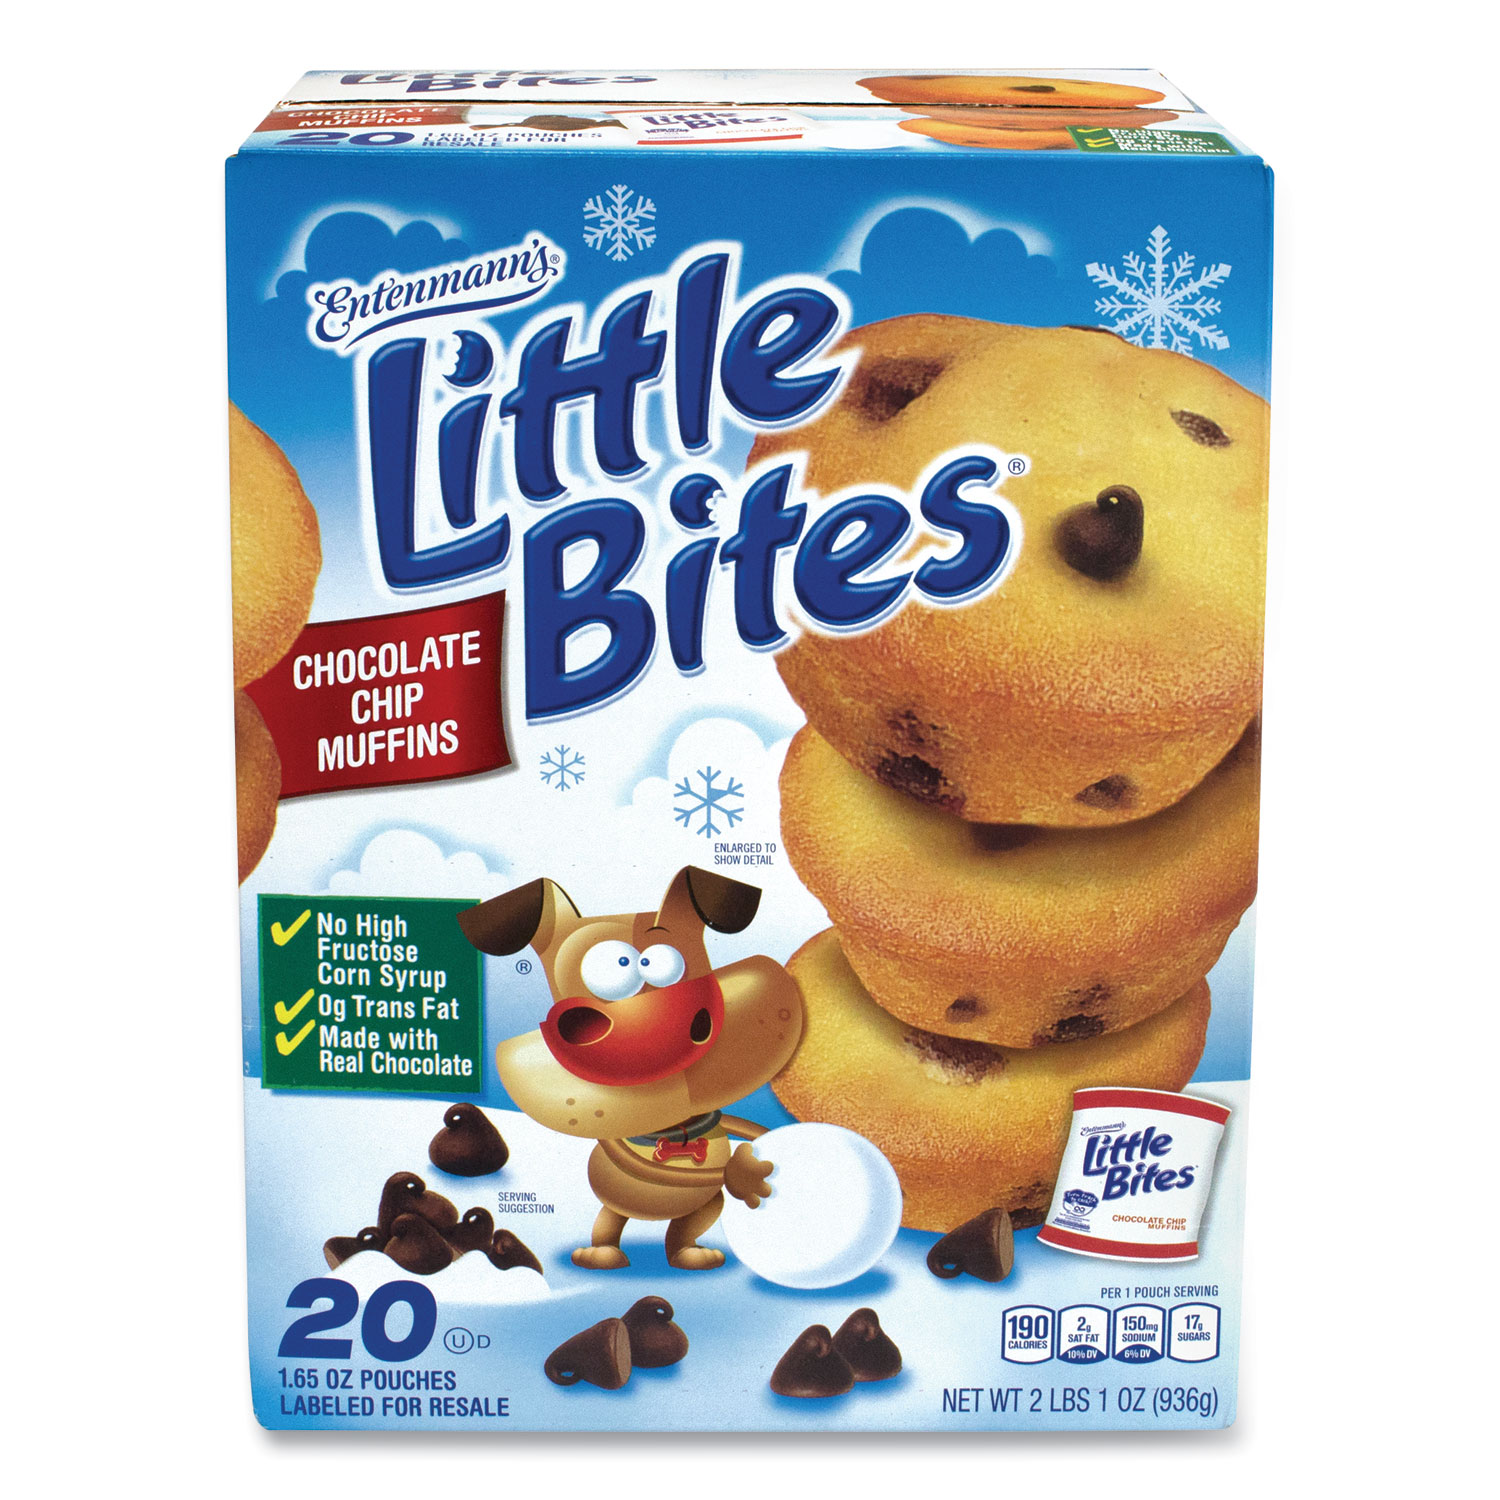  Entenmann's Little Bites 887192 Little Bites Muffins, Chocolate Chip, 1.65 oz Pouch, 20 Pouches/Box, Free Delivery in 1-4 Business Days (GRR90000016) 